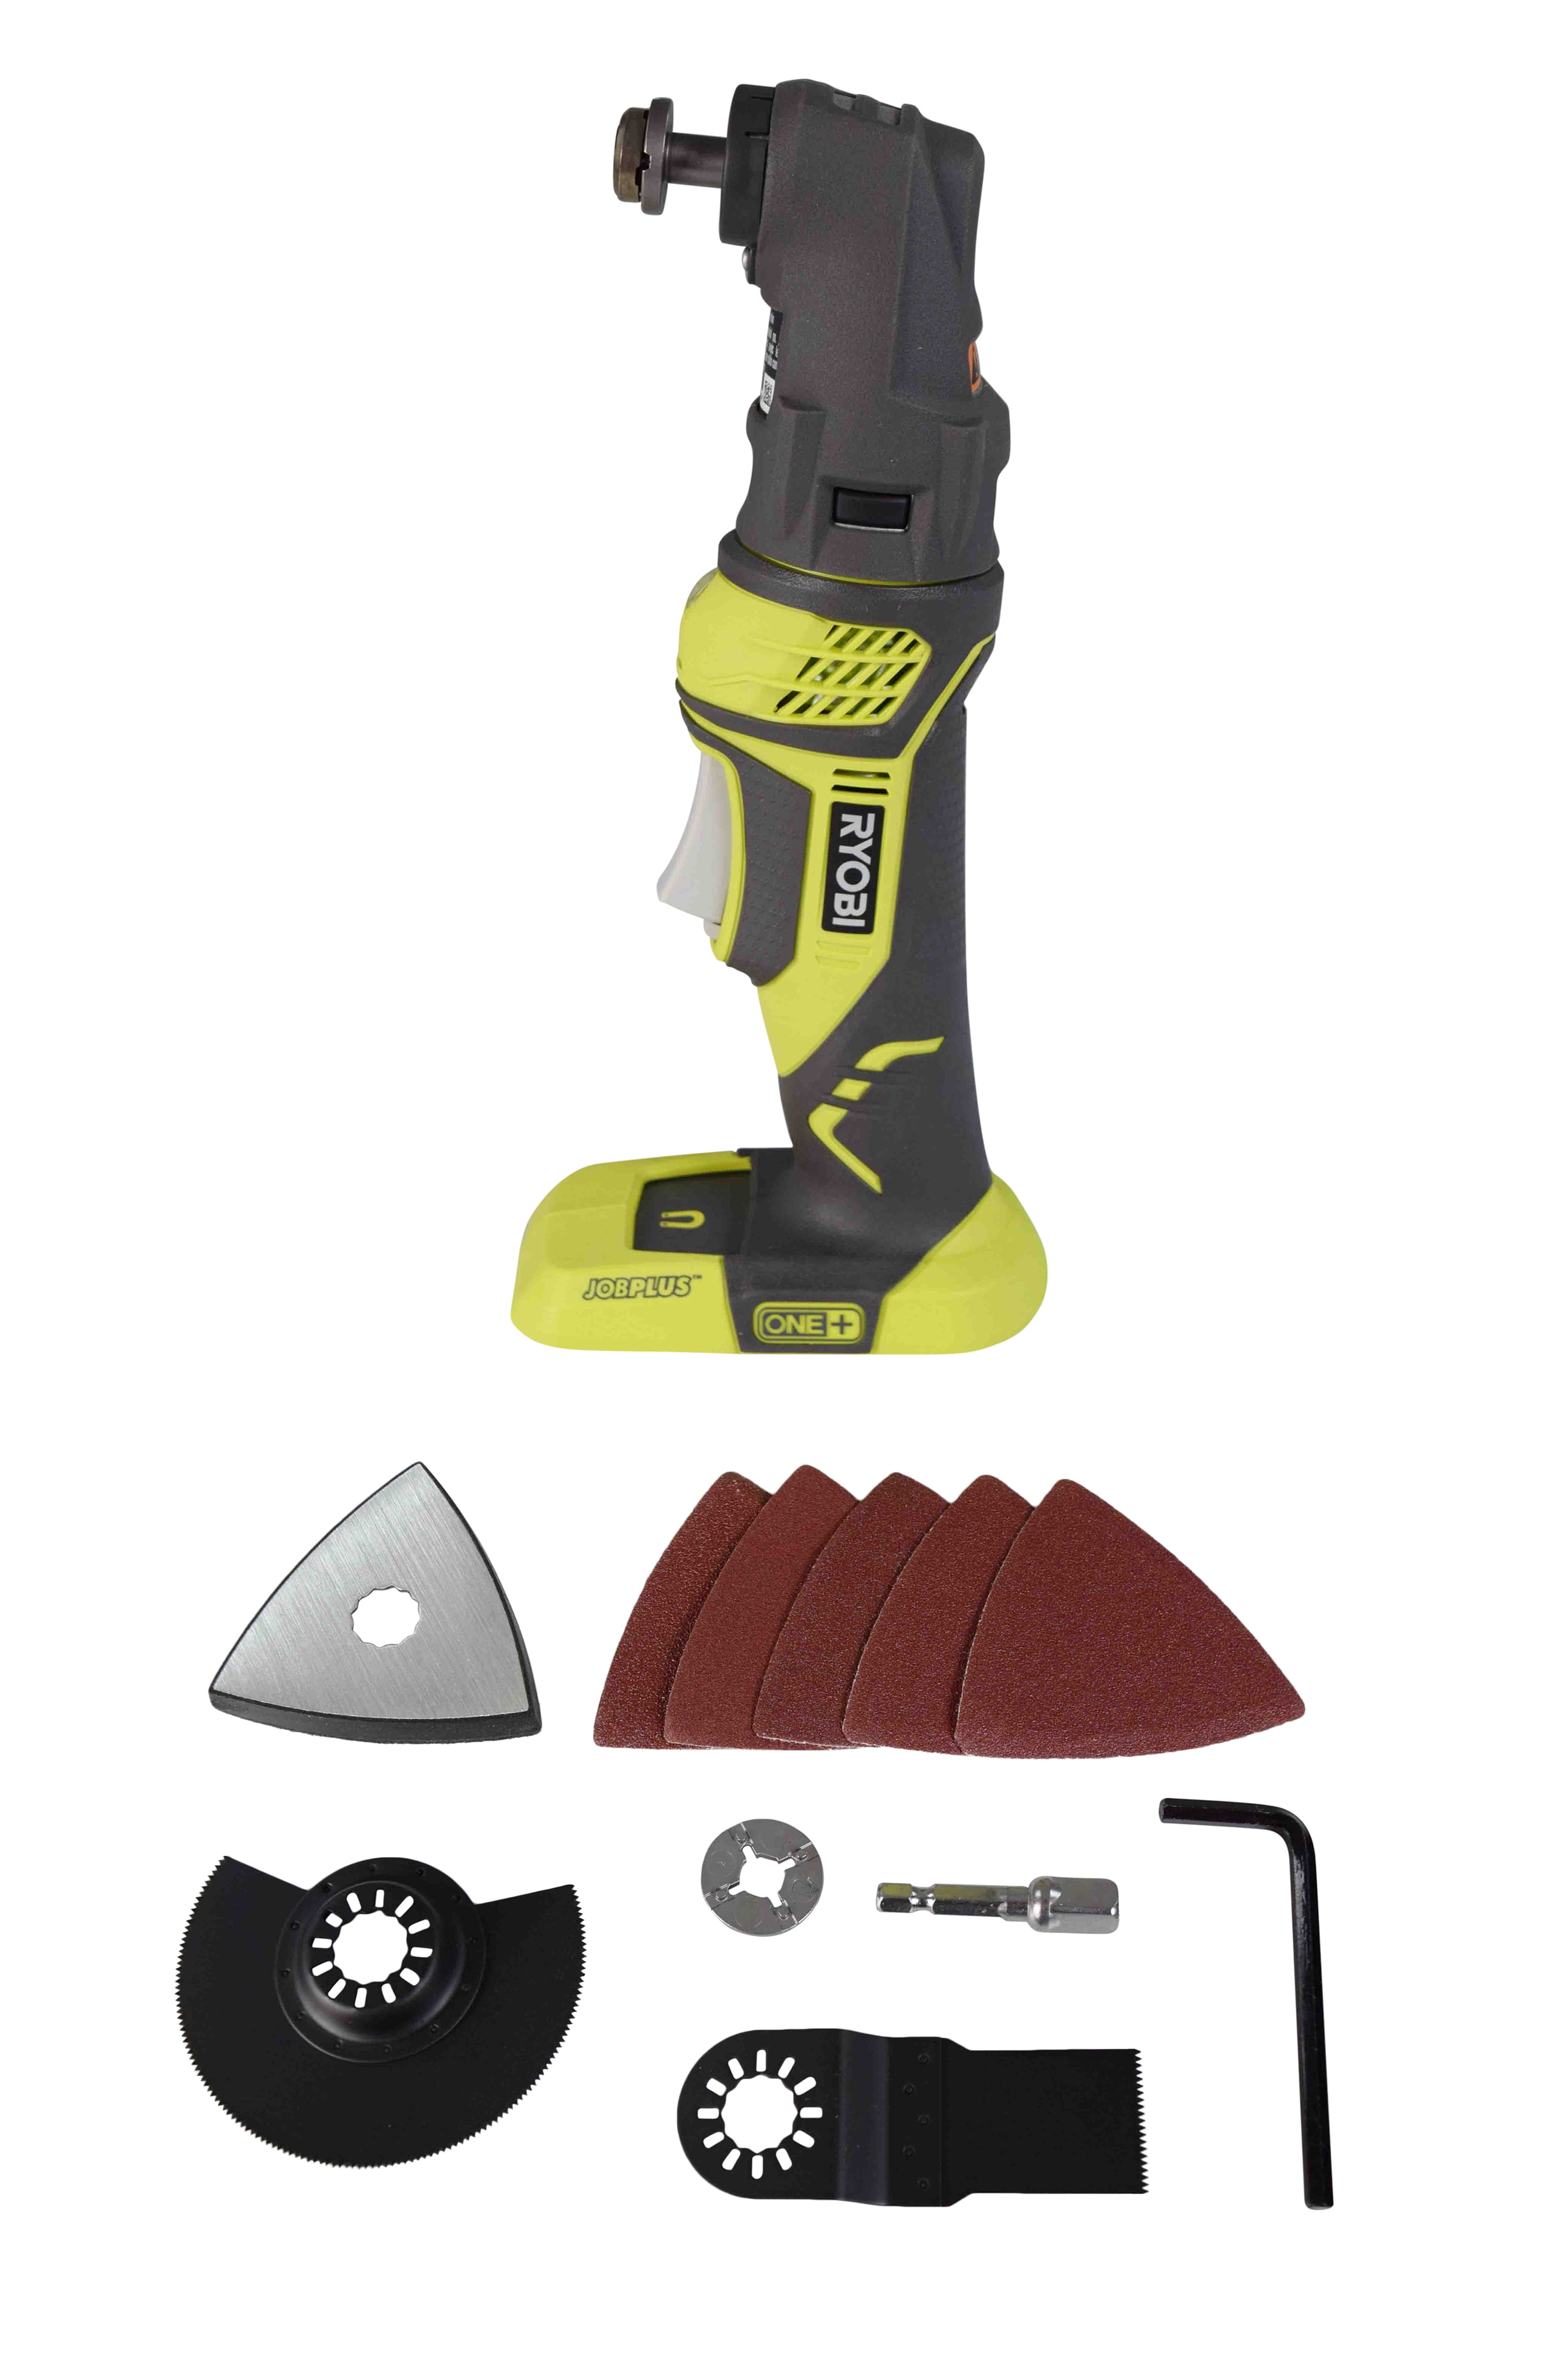 Details about  / Ryobi Jobplus  Multi Tool Head P570 P246 ZR Factory Reconditioned Attachments